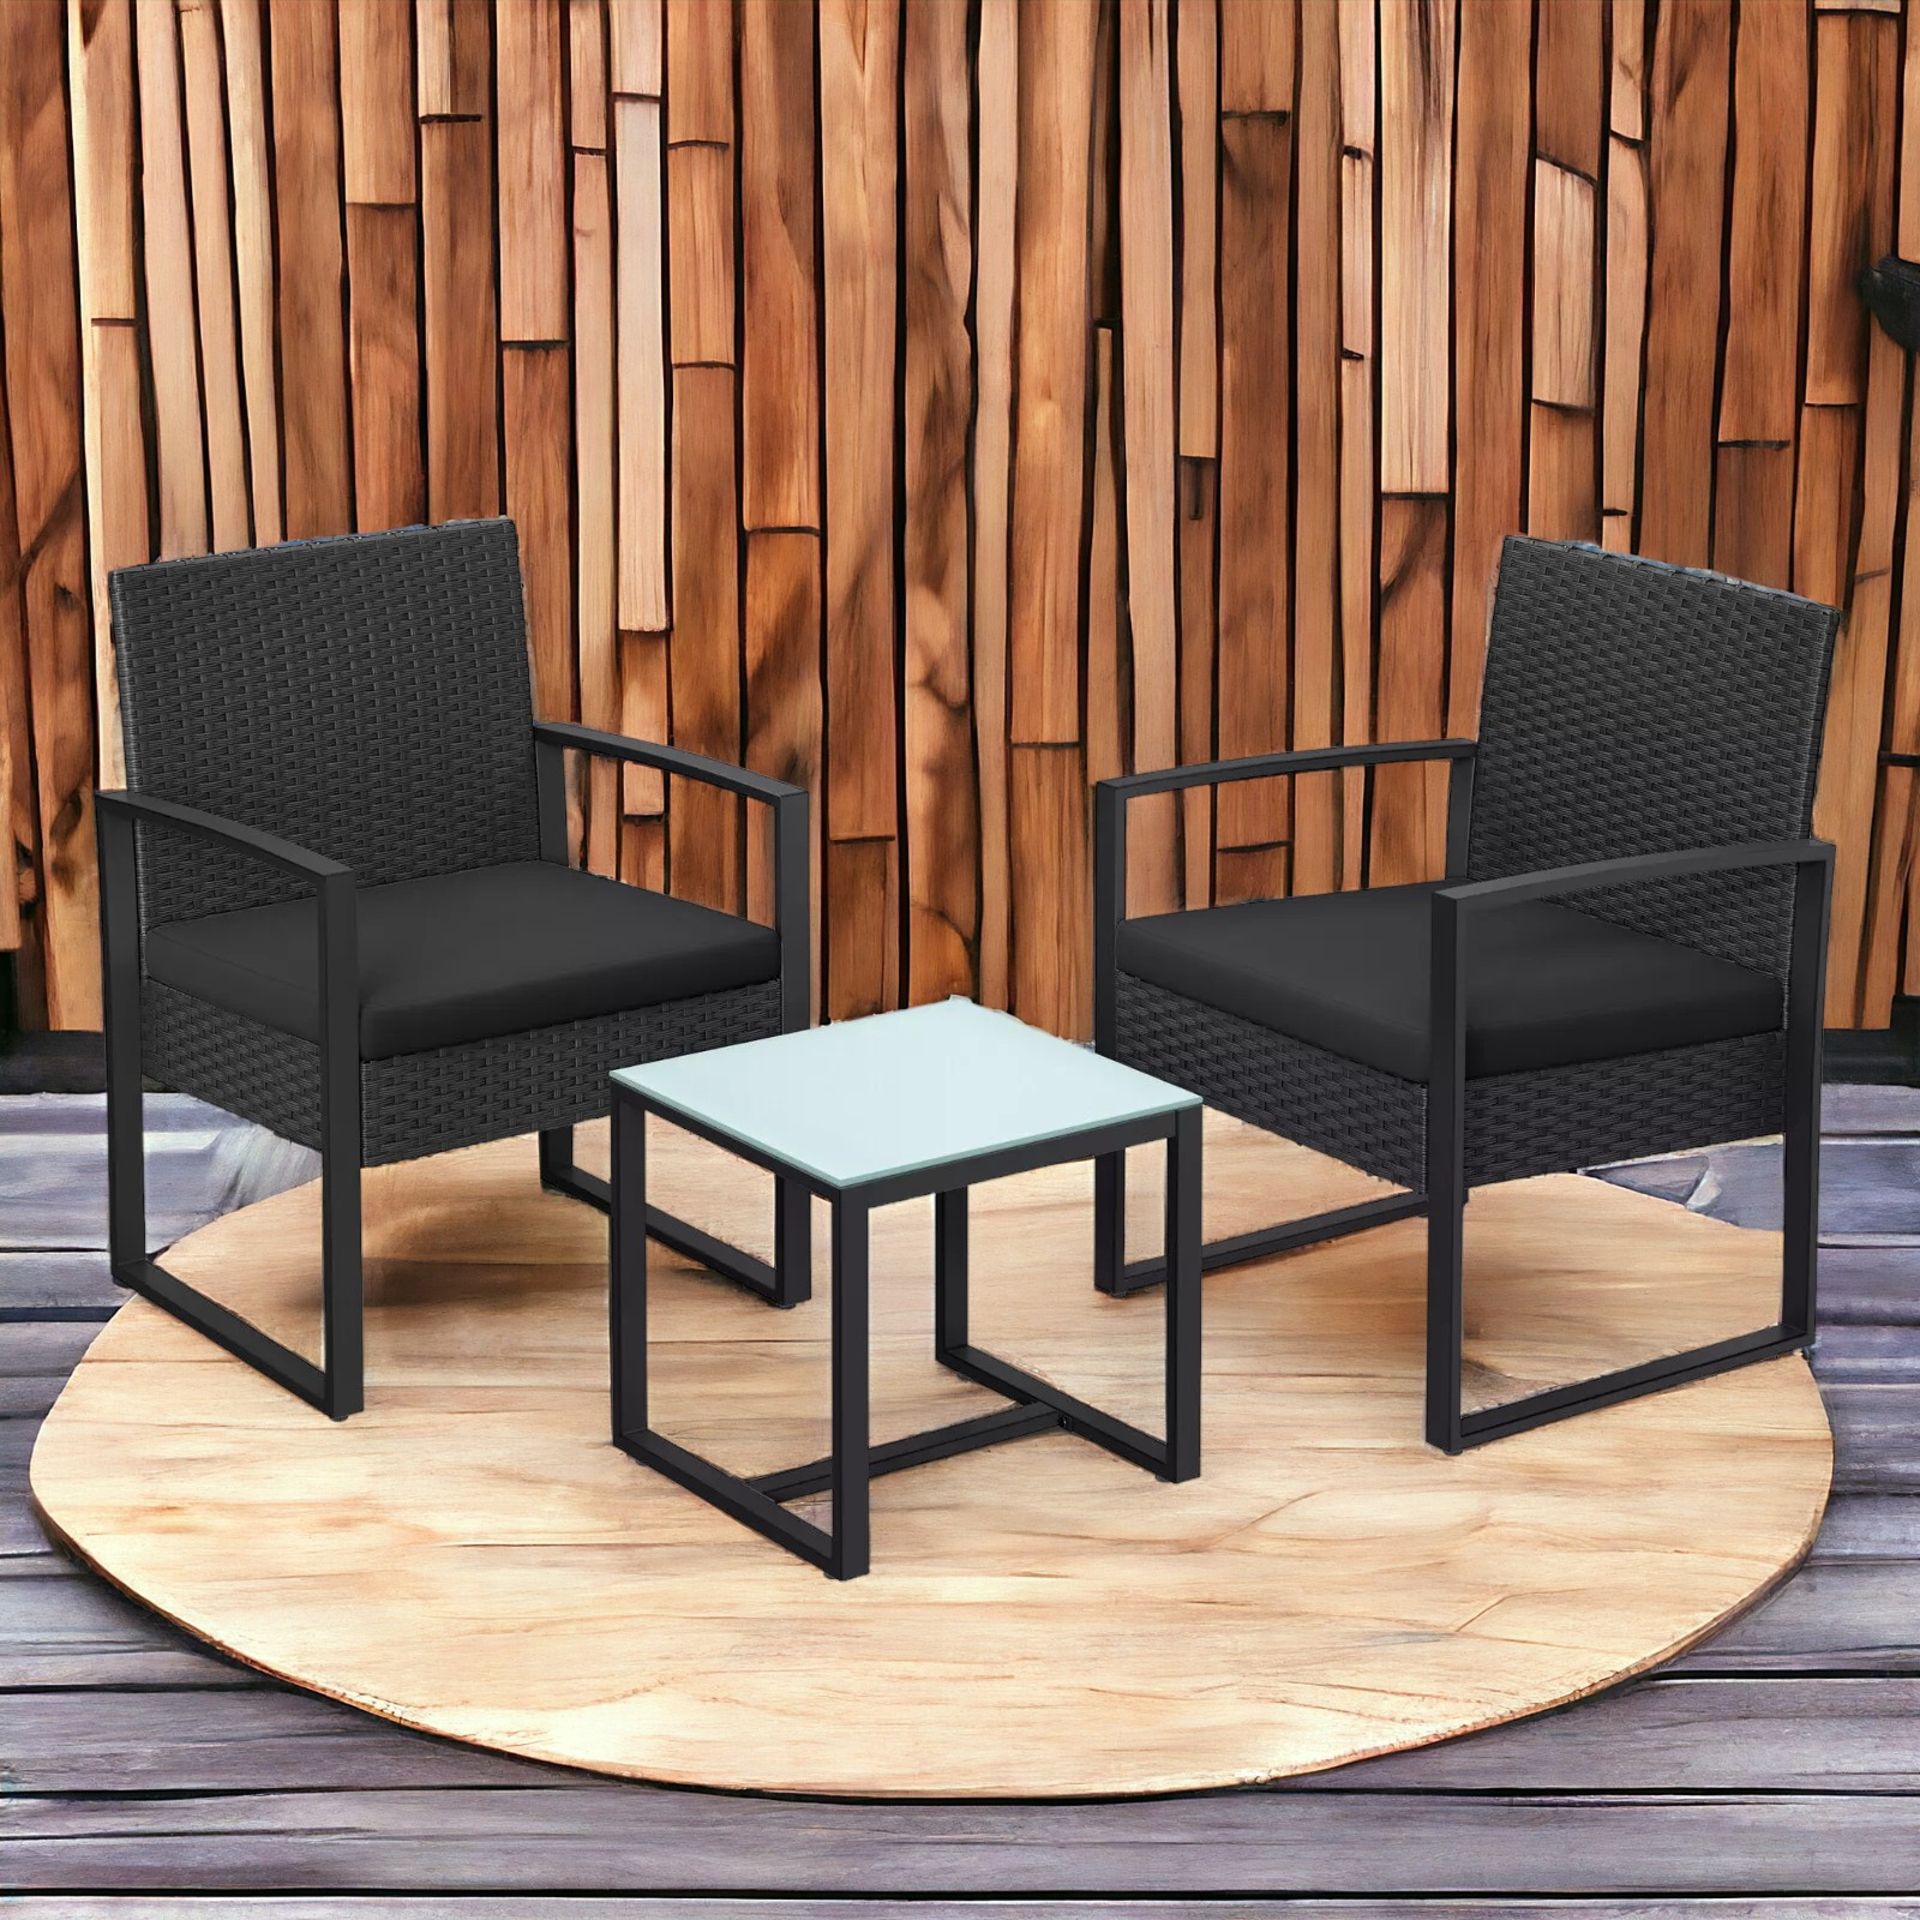 FREE DELIVERY - BRAND NEW 3-PIECE PATIO SET OUTDOOR FURNITURE SETS SEATING FOR BISTRO